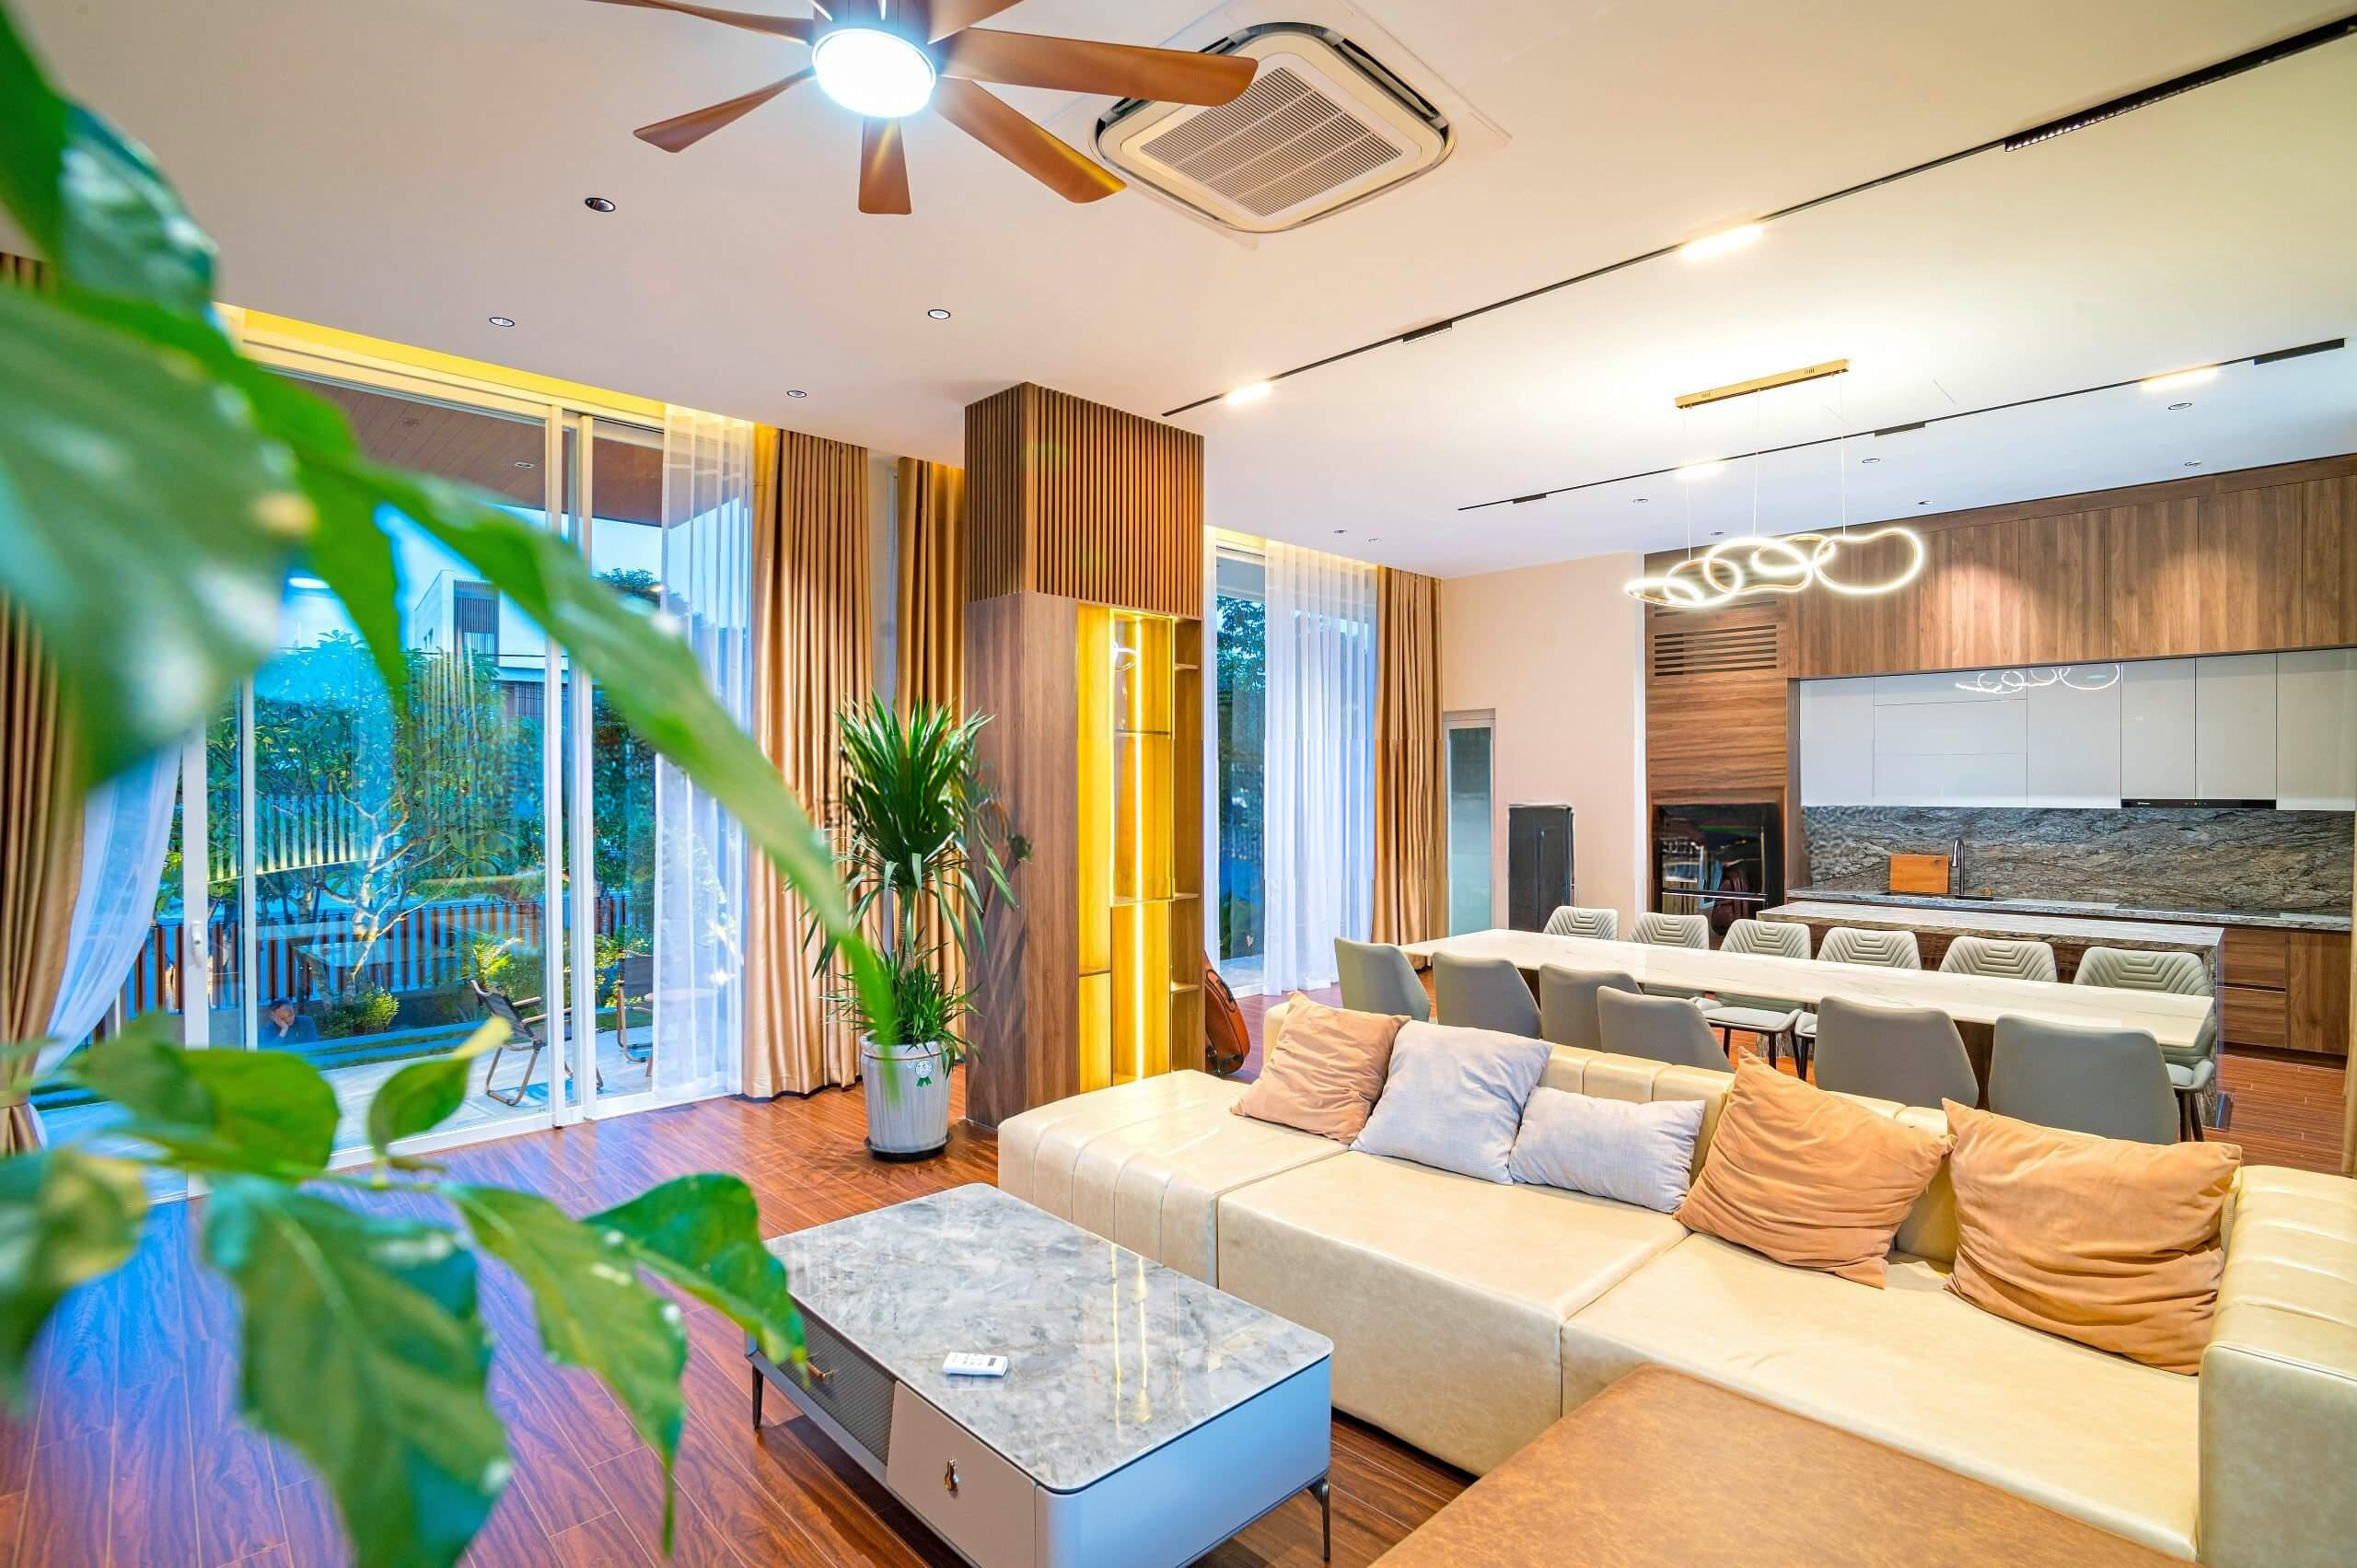 For Sale: Phú Mỹ An villa, newly completed with 100% modern style.